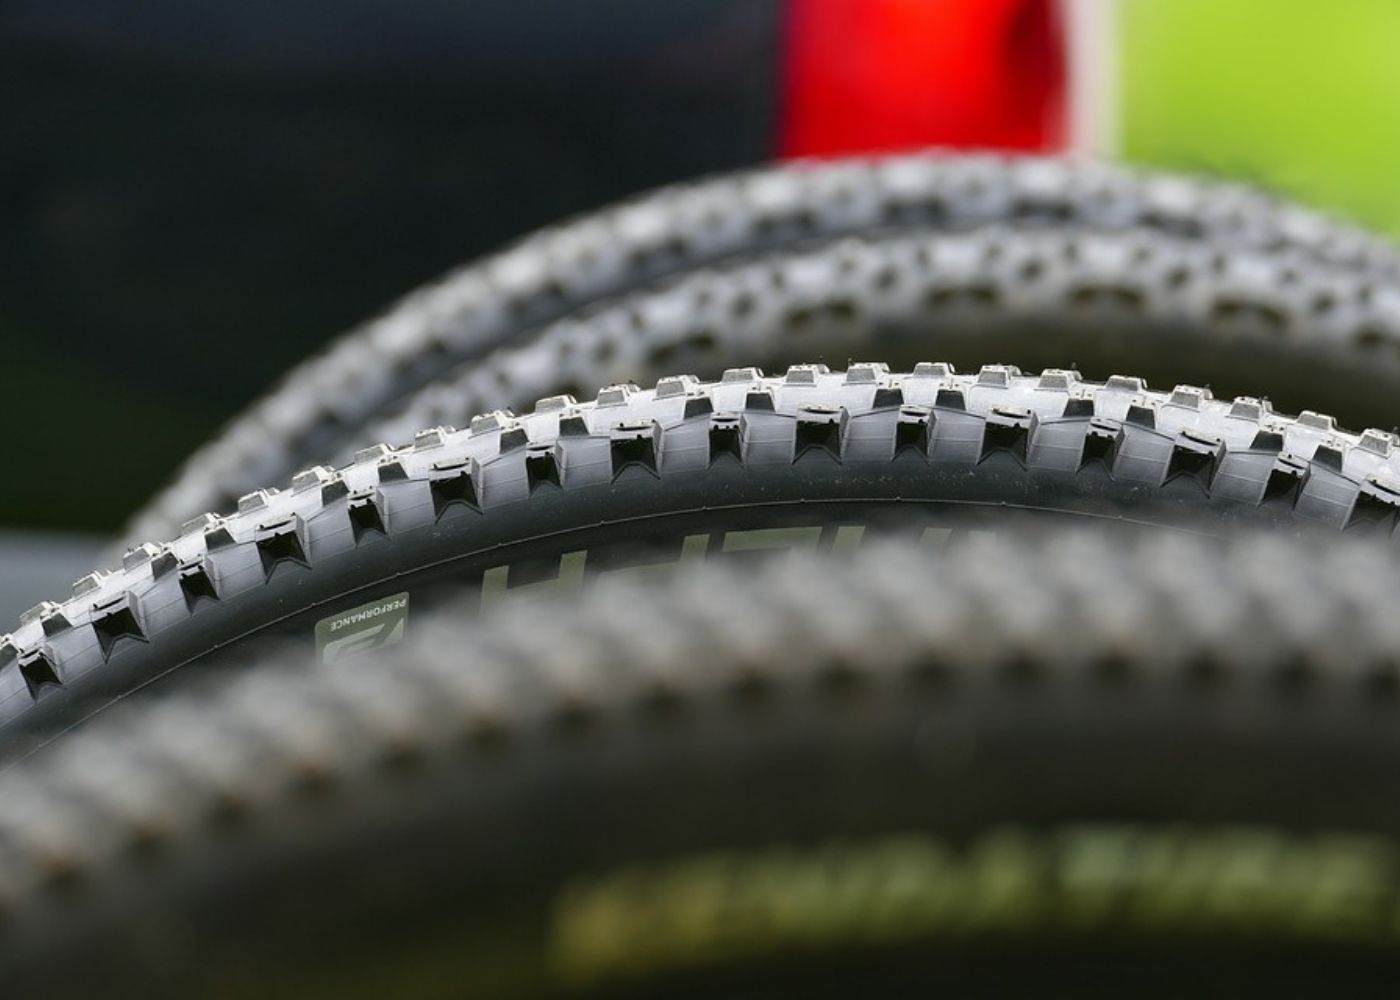 a close up view of some tires on a bike